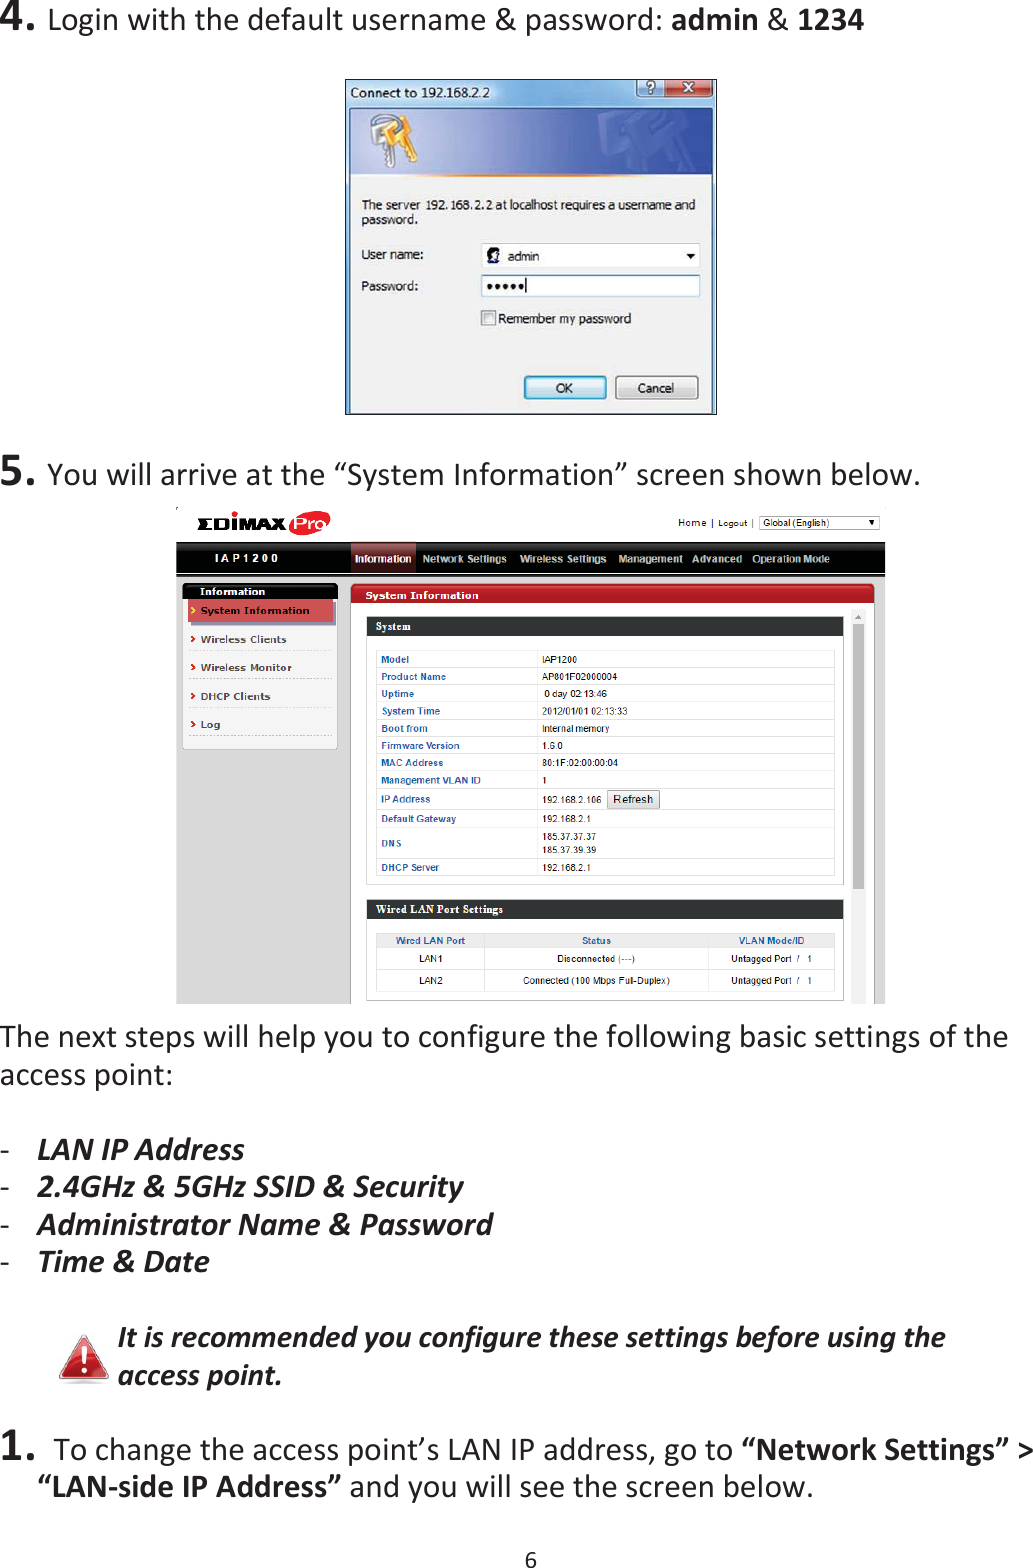 6  4. Login with the default username &amp; password: admin &amp; 1234    5. You will arrive at the “System Information” screen shown below.  The next steps will help you to configure the following basic settings of the access point:  -LAN IP Address -2.4GHz &amp; 5GHz SSID &amp; Security -Administrator Name &amp; Password -Time &amp; Date  It is recommended you configure these settings before using the access point.  1. To change the access point’s LAN IP address, go to “Network Settings” &gt; “LAN-side IP Address” and you will see the screen below.  